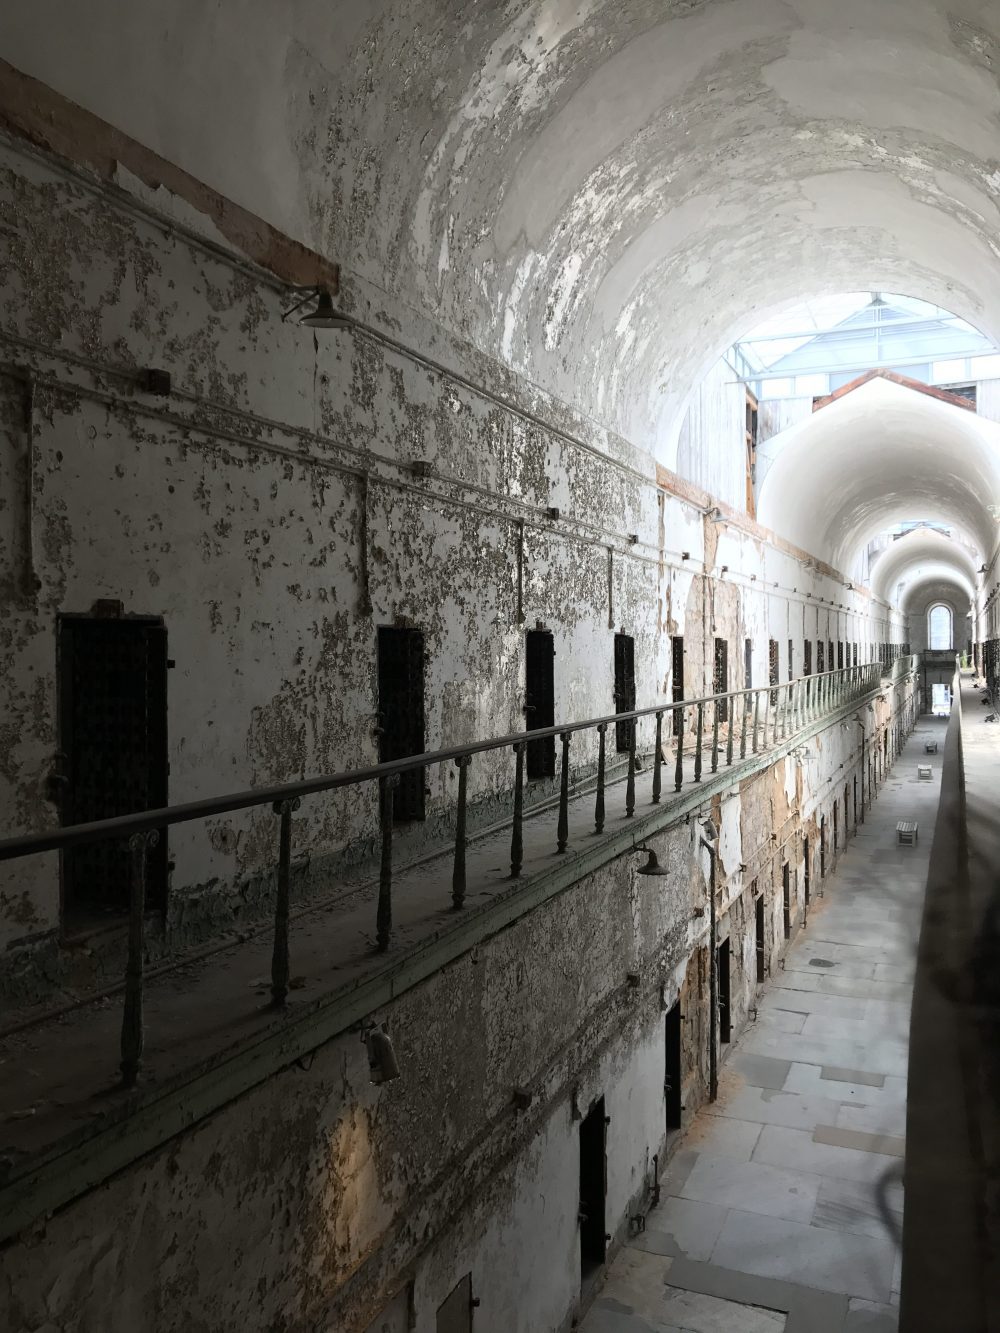 eastern_state_penitentiary